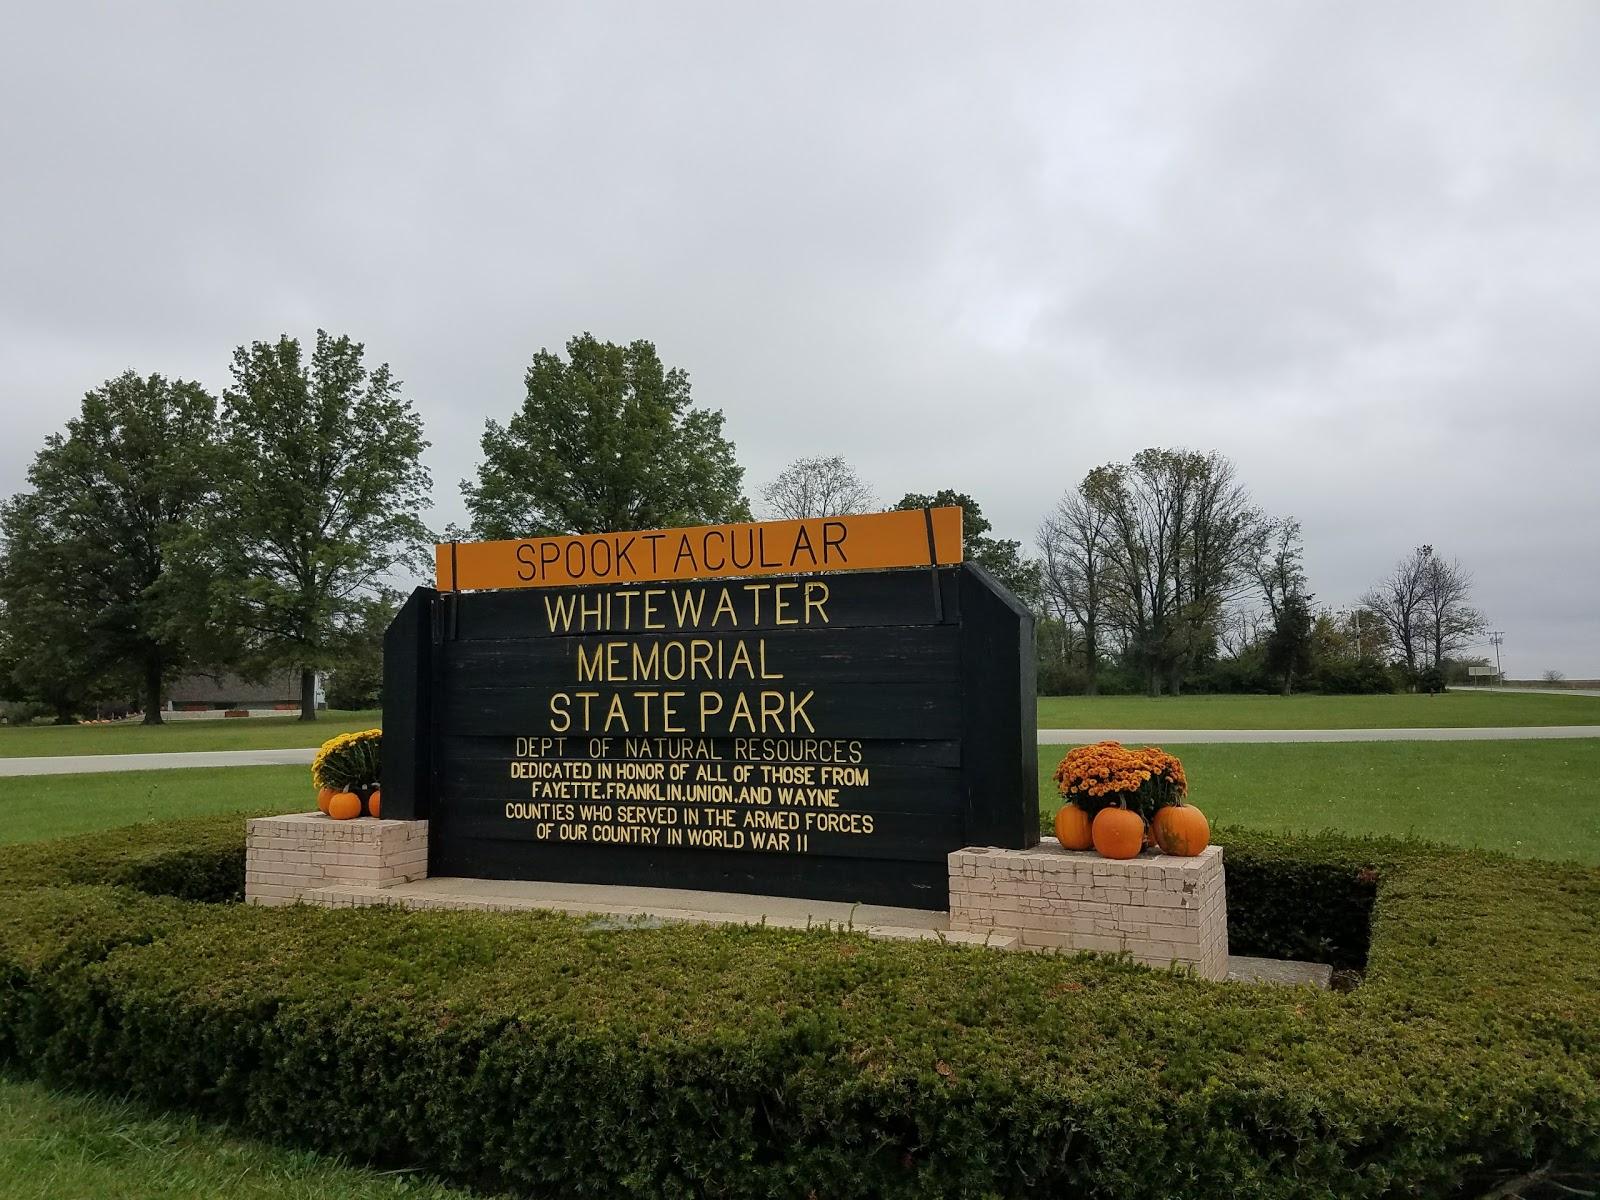 Sandee - Whitewater Memorial State Park